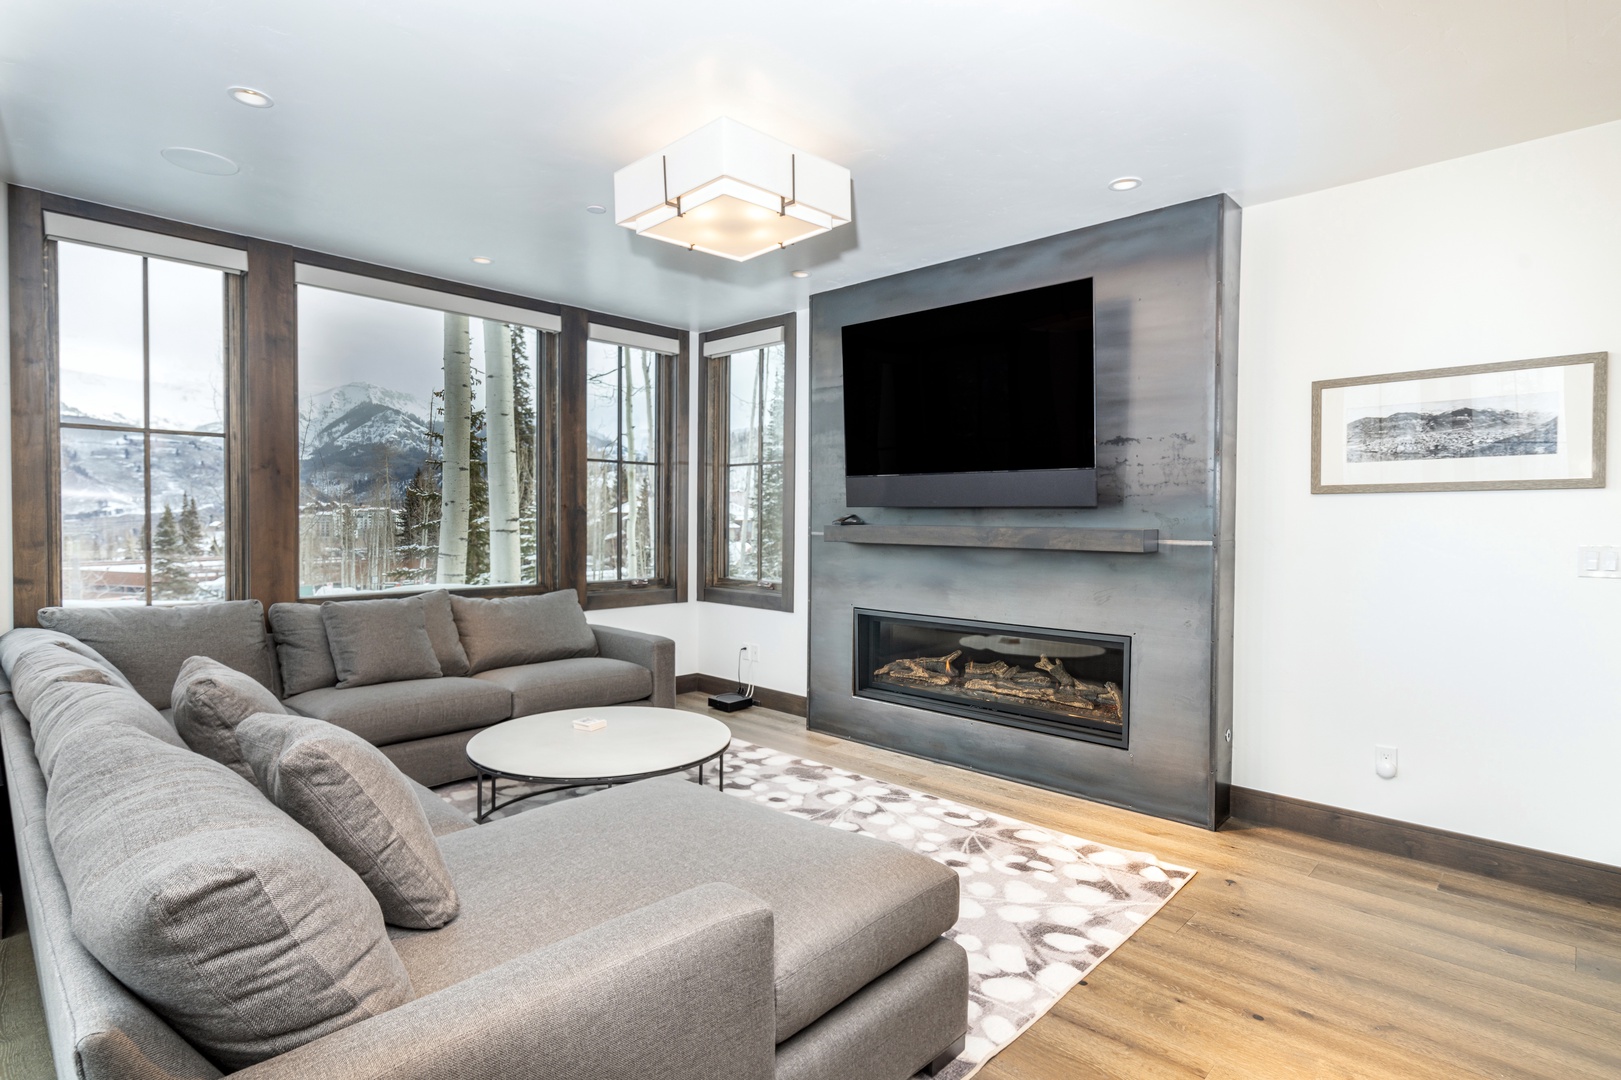 Comfy and modern gas fireplace and huge smart TV